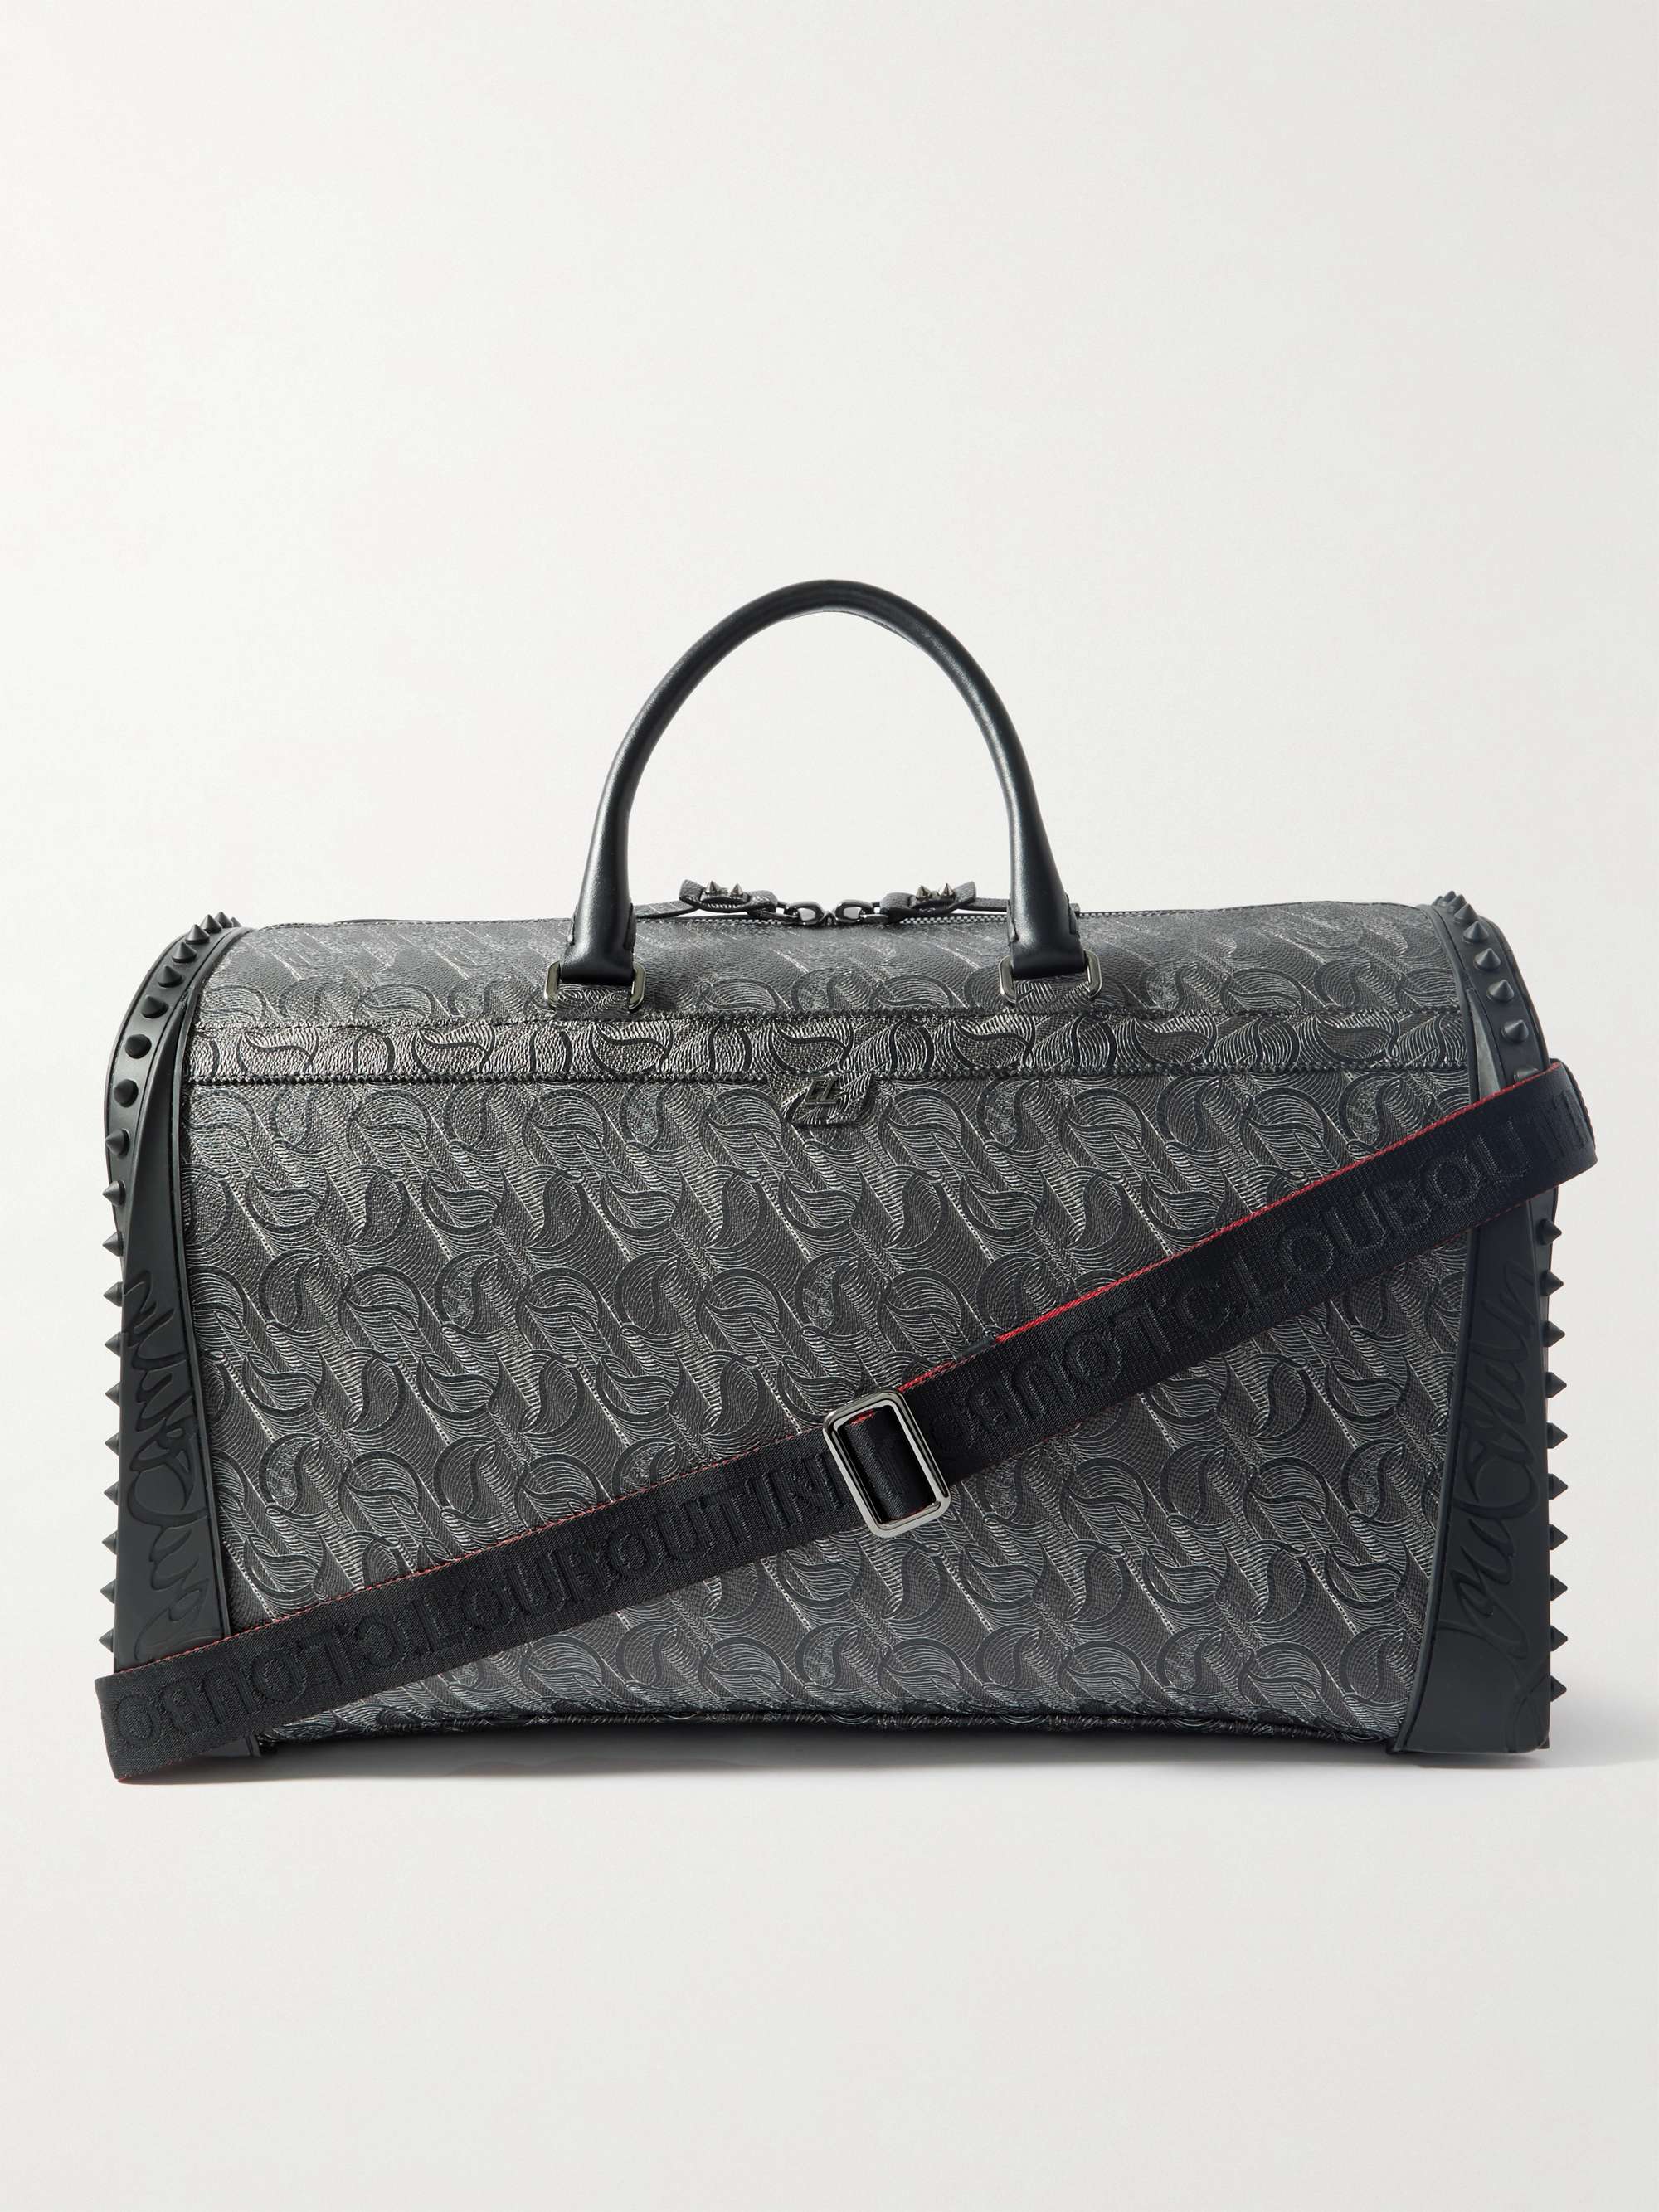 CHRISTIAN LOUBOUTIN Sneakender Studded Rubber-Trimmed Textured-Leather Weekend Bag